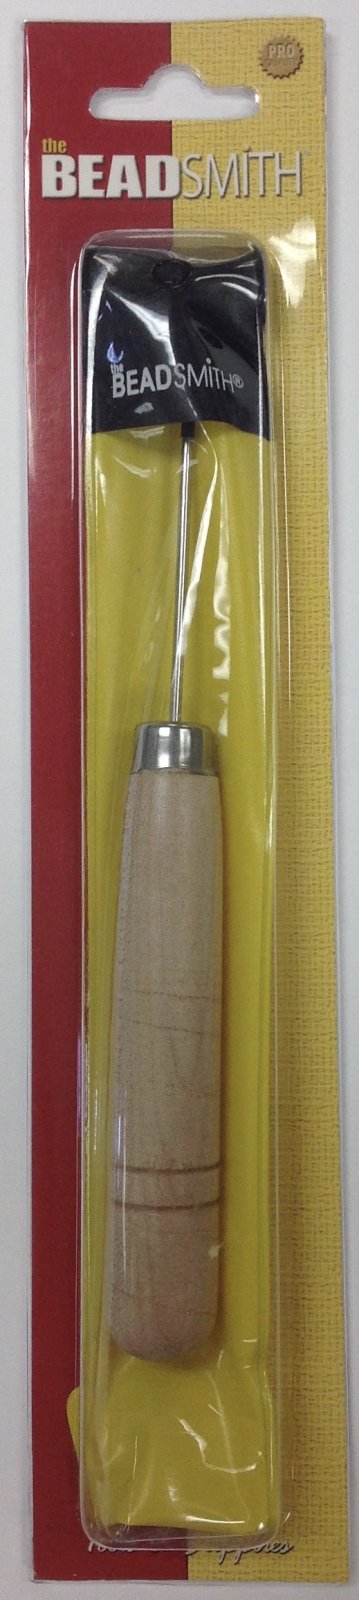 wooden handle awl